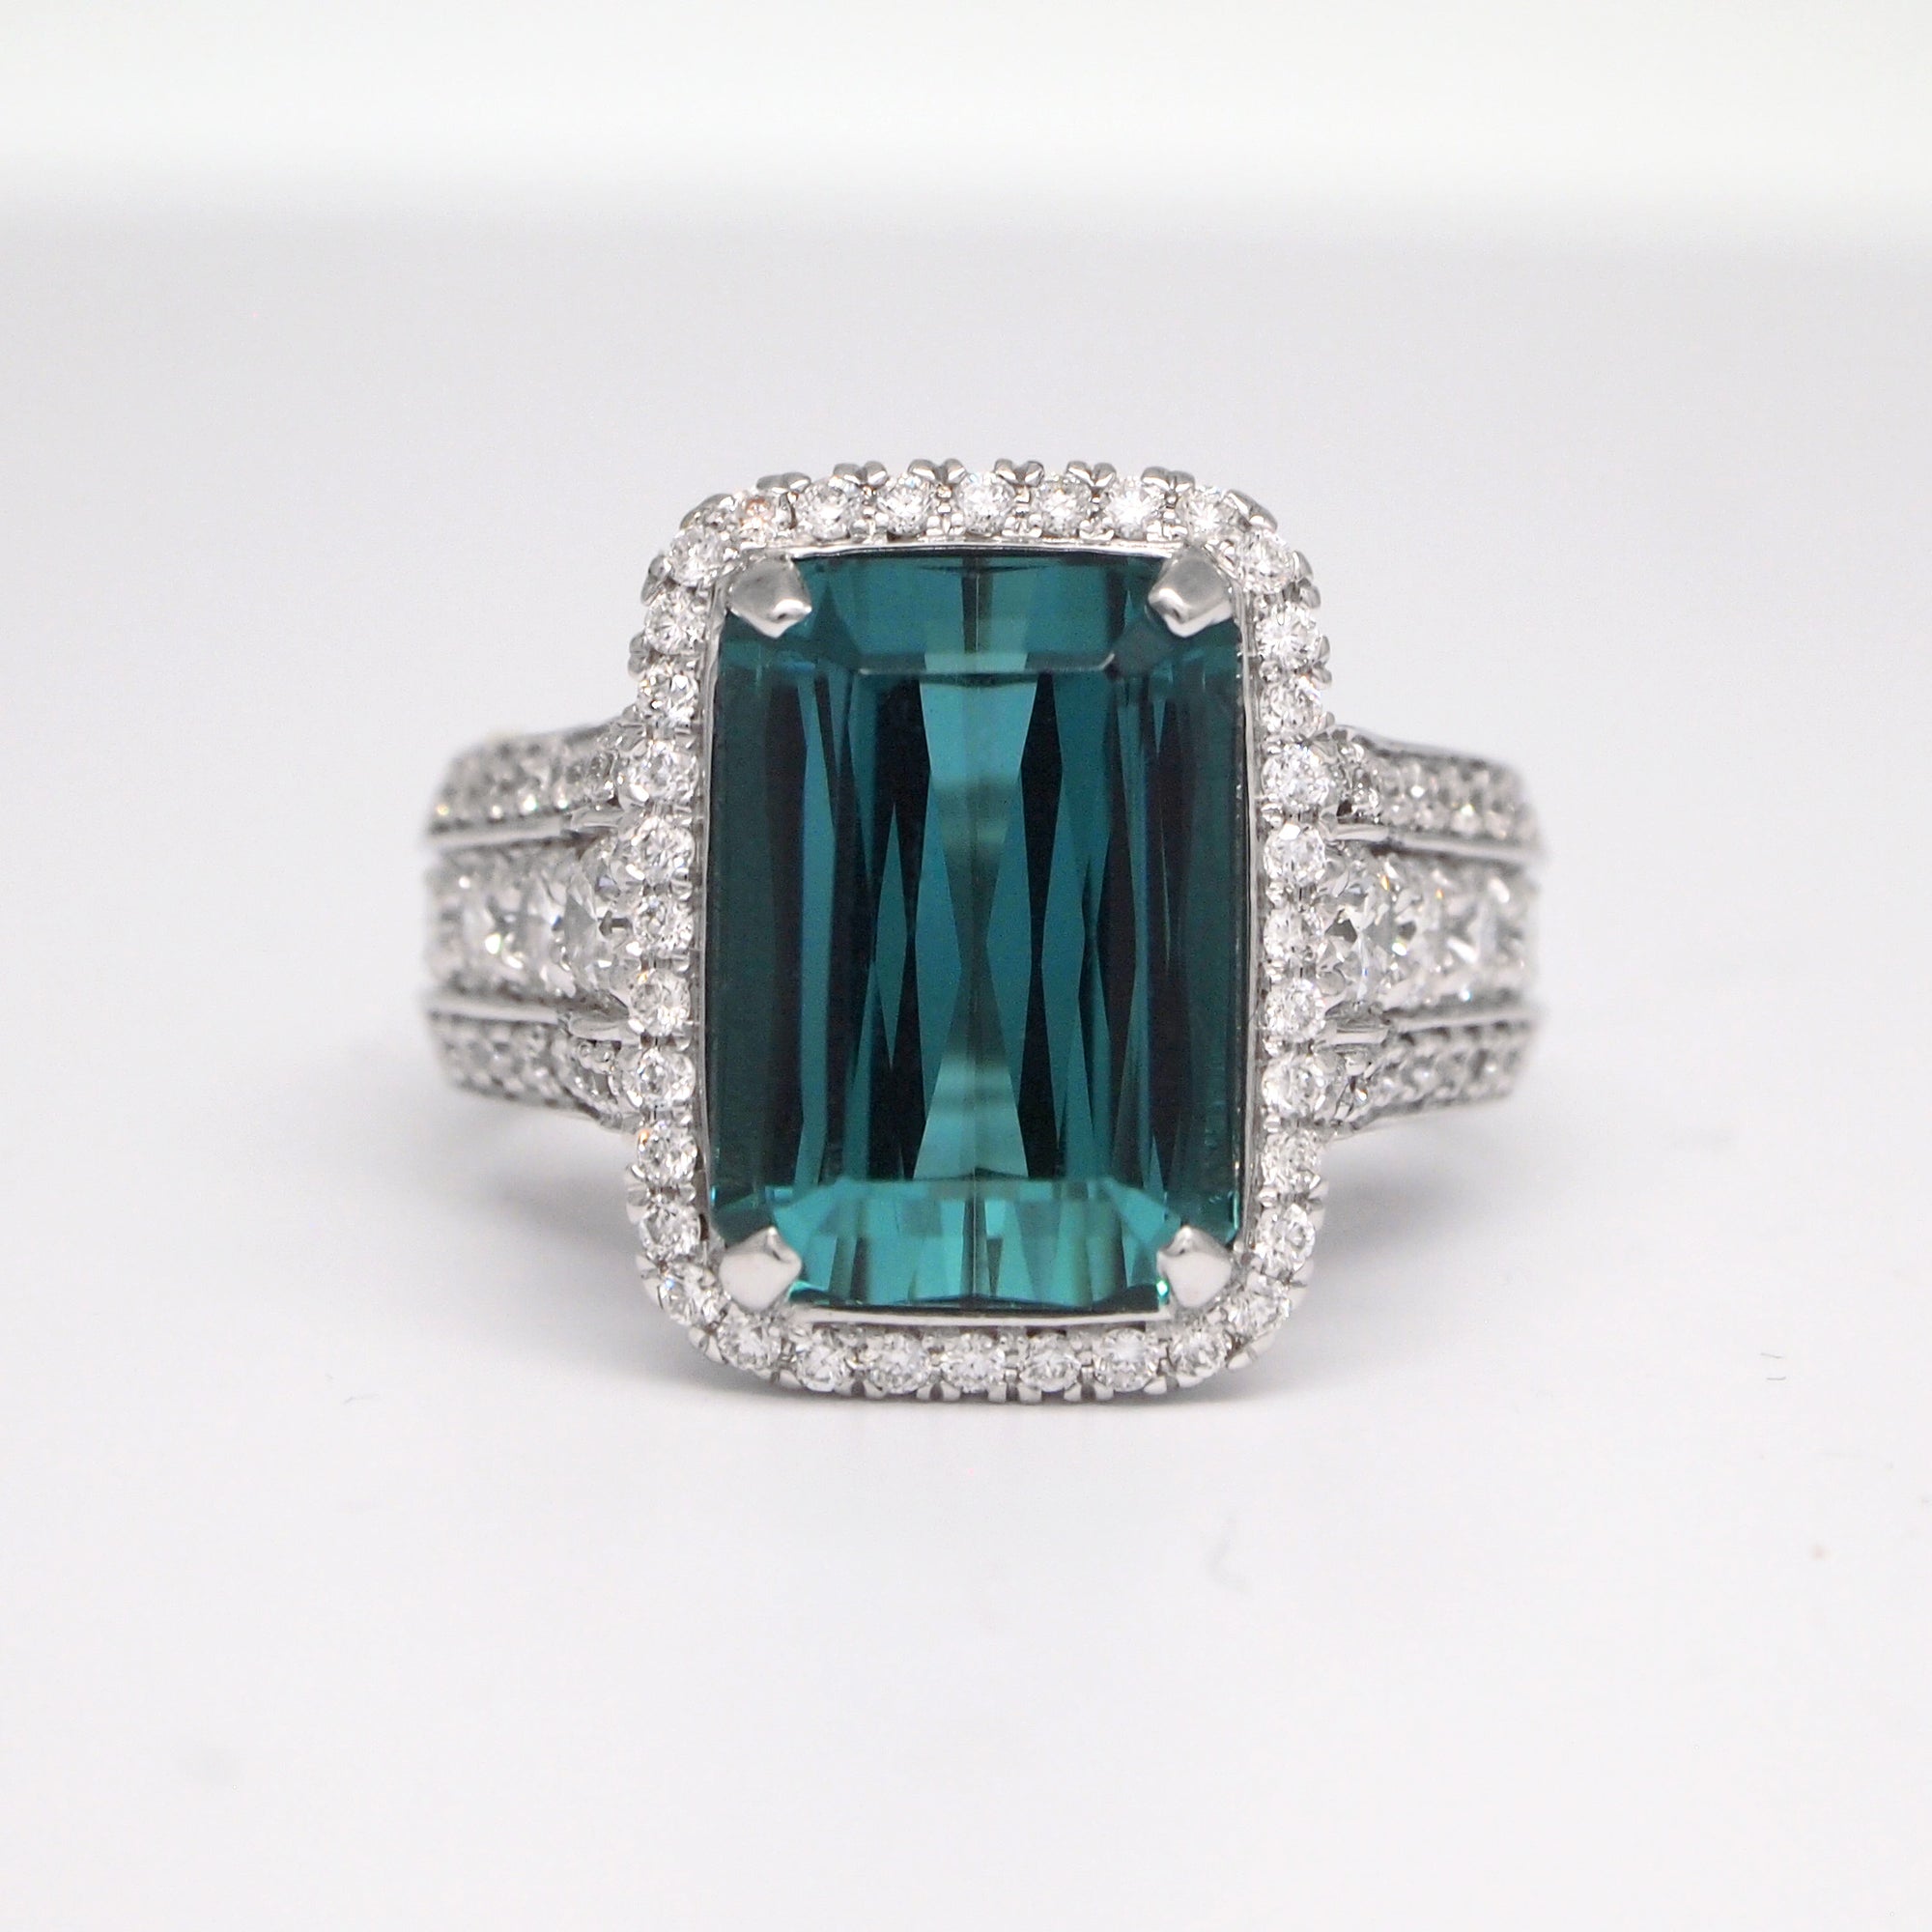 One Of A Kind 18K White Gold Rare Blue-Green Tourmaline and Diamond Ring